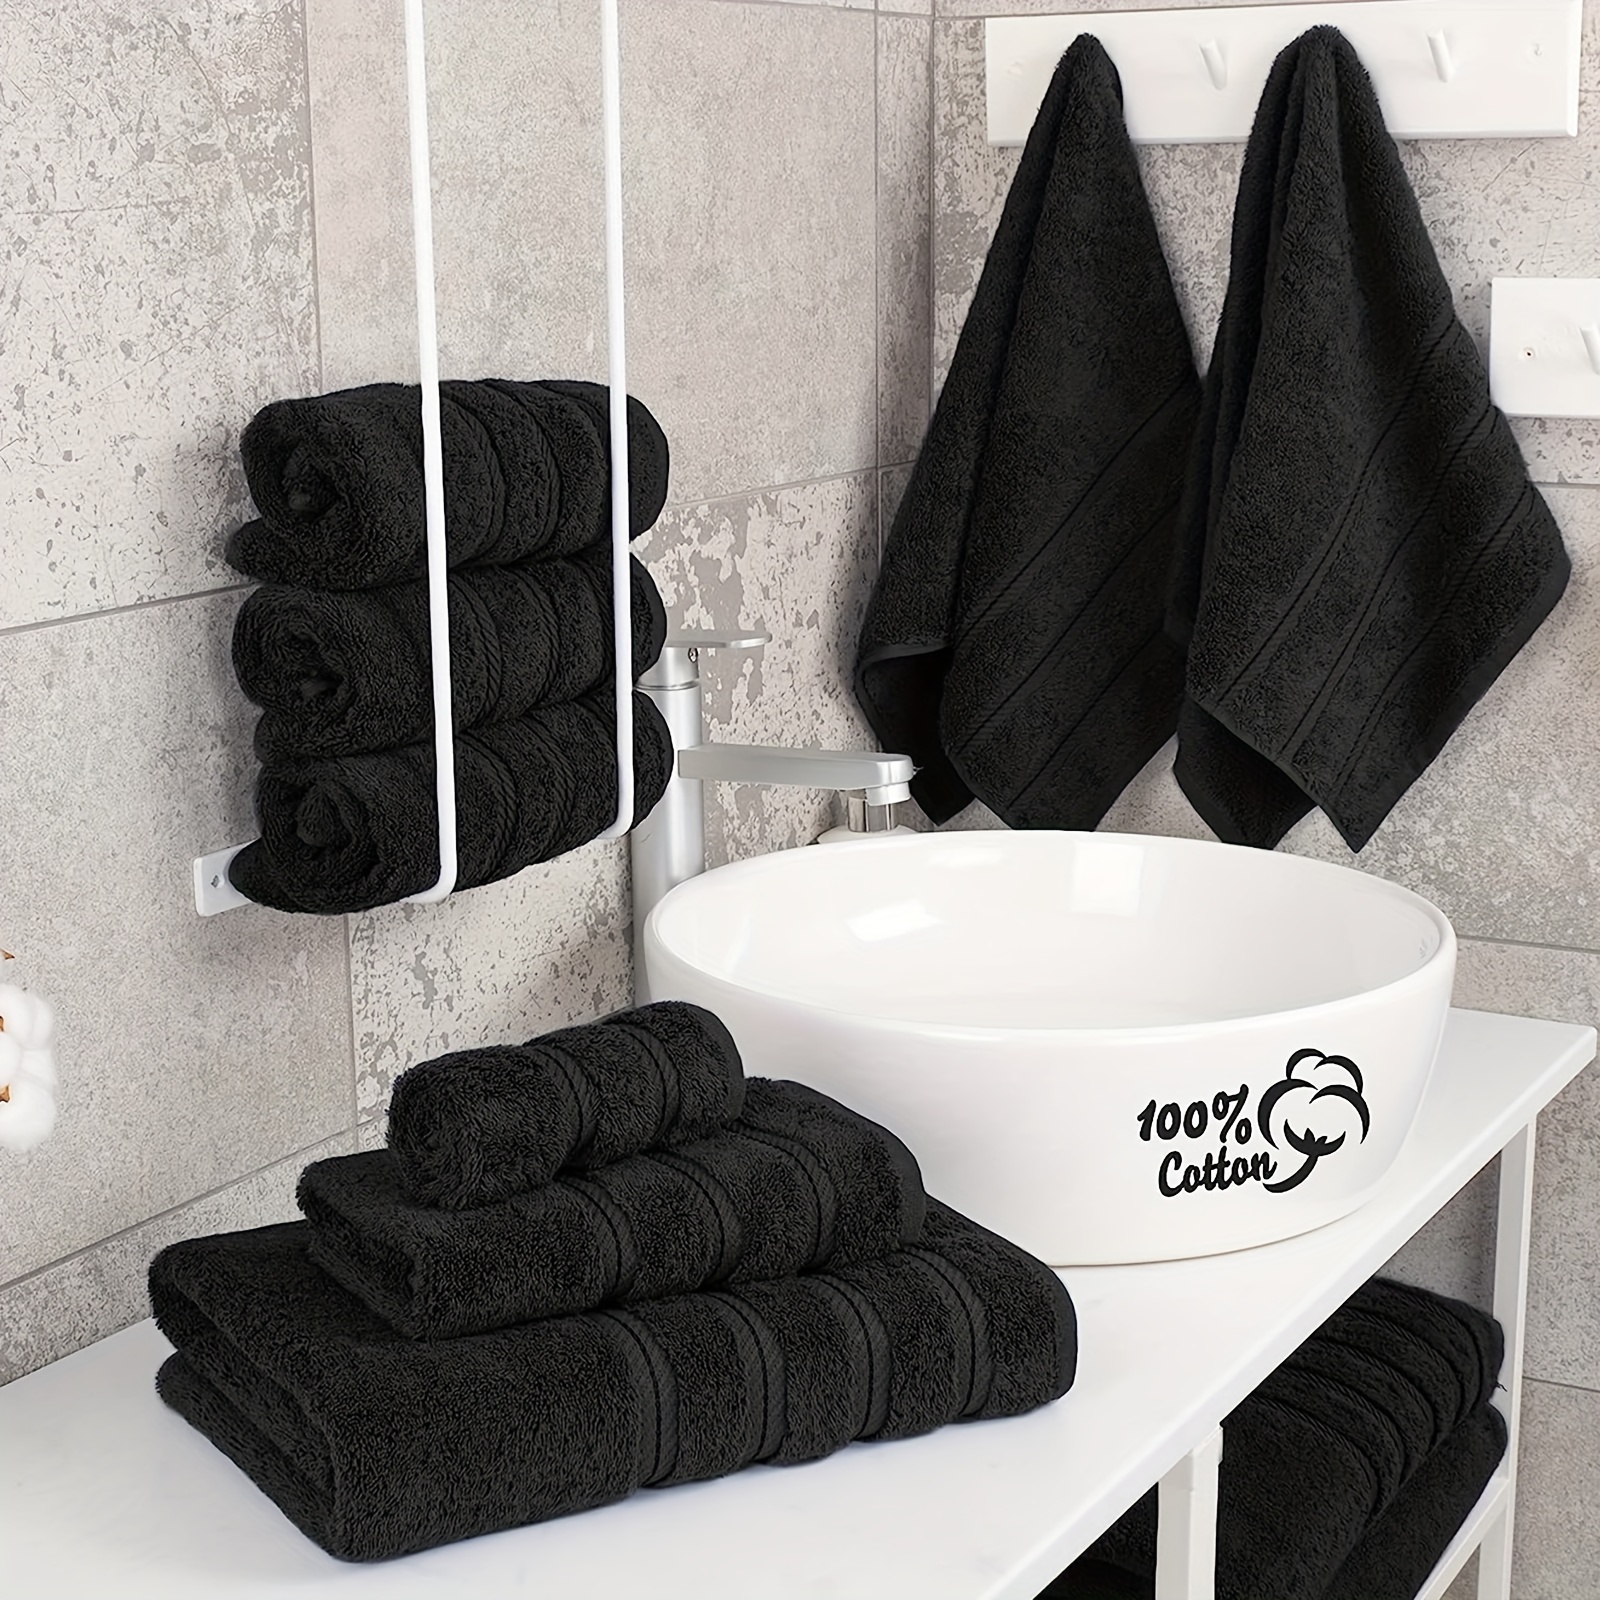 What Color Towels for a Black and White Bathroom?